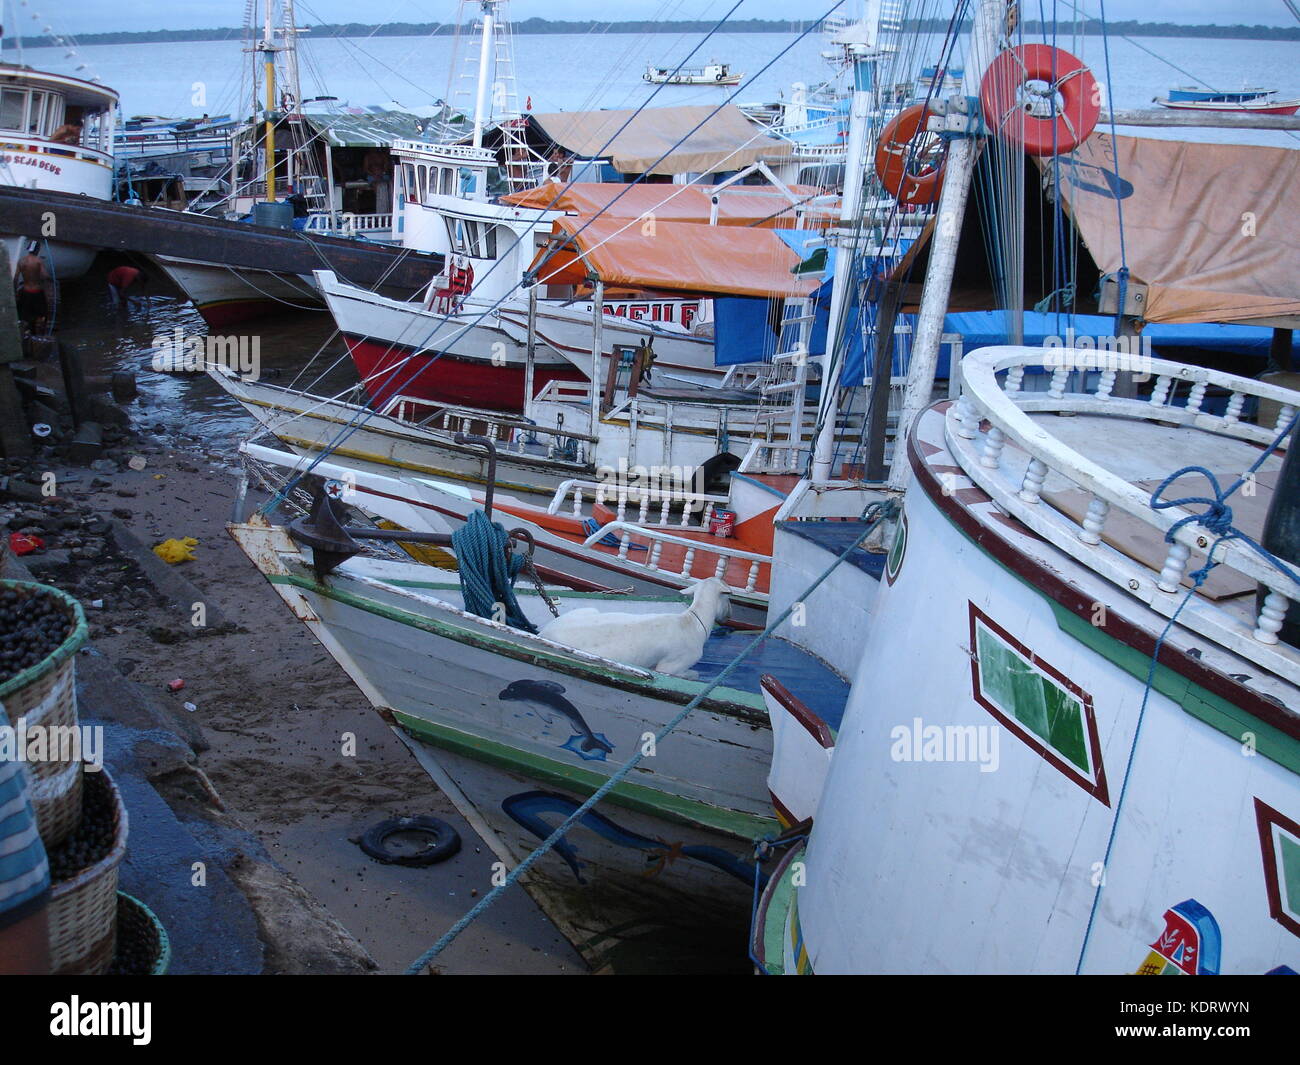 Viw of the boats from acai market in Belem, Brazil Stock Photo